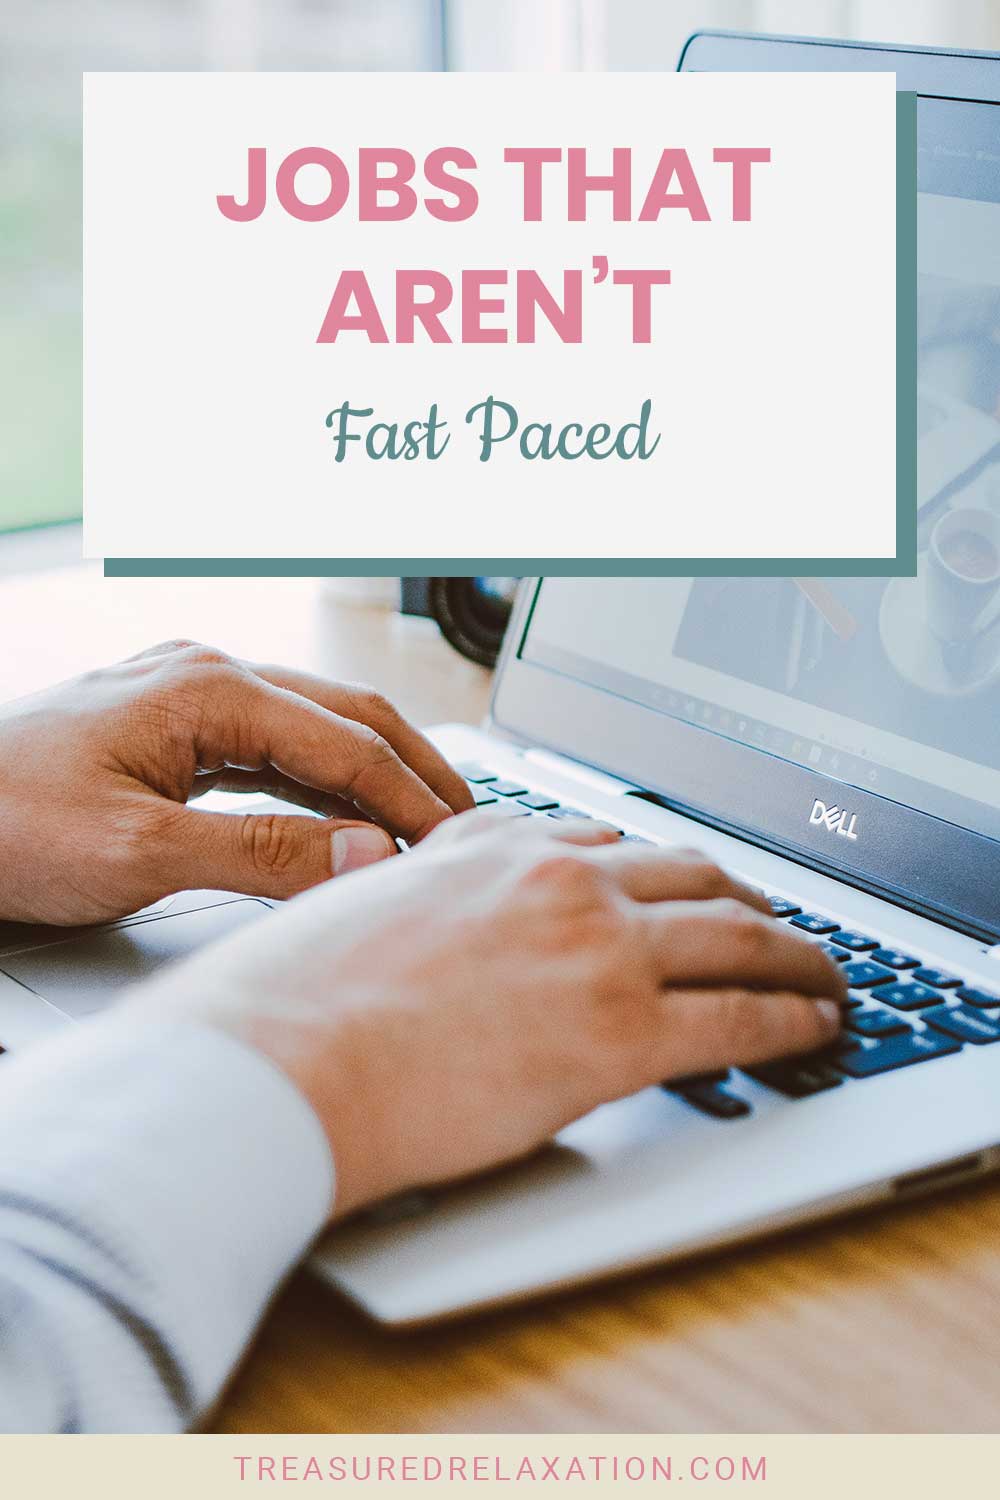 Jobs That Aren’t Fast Paced